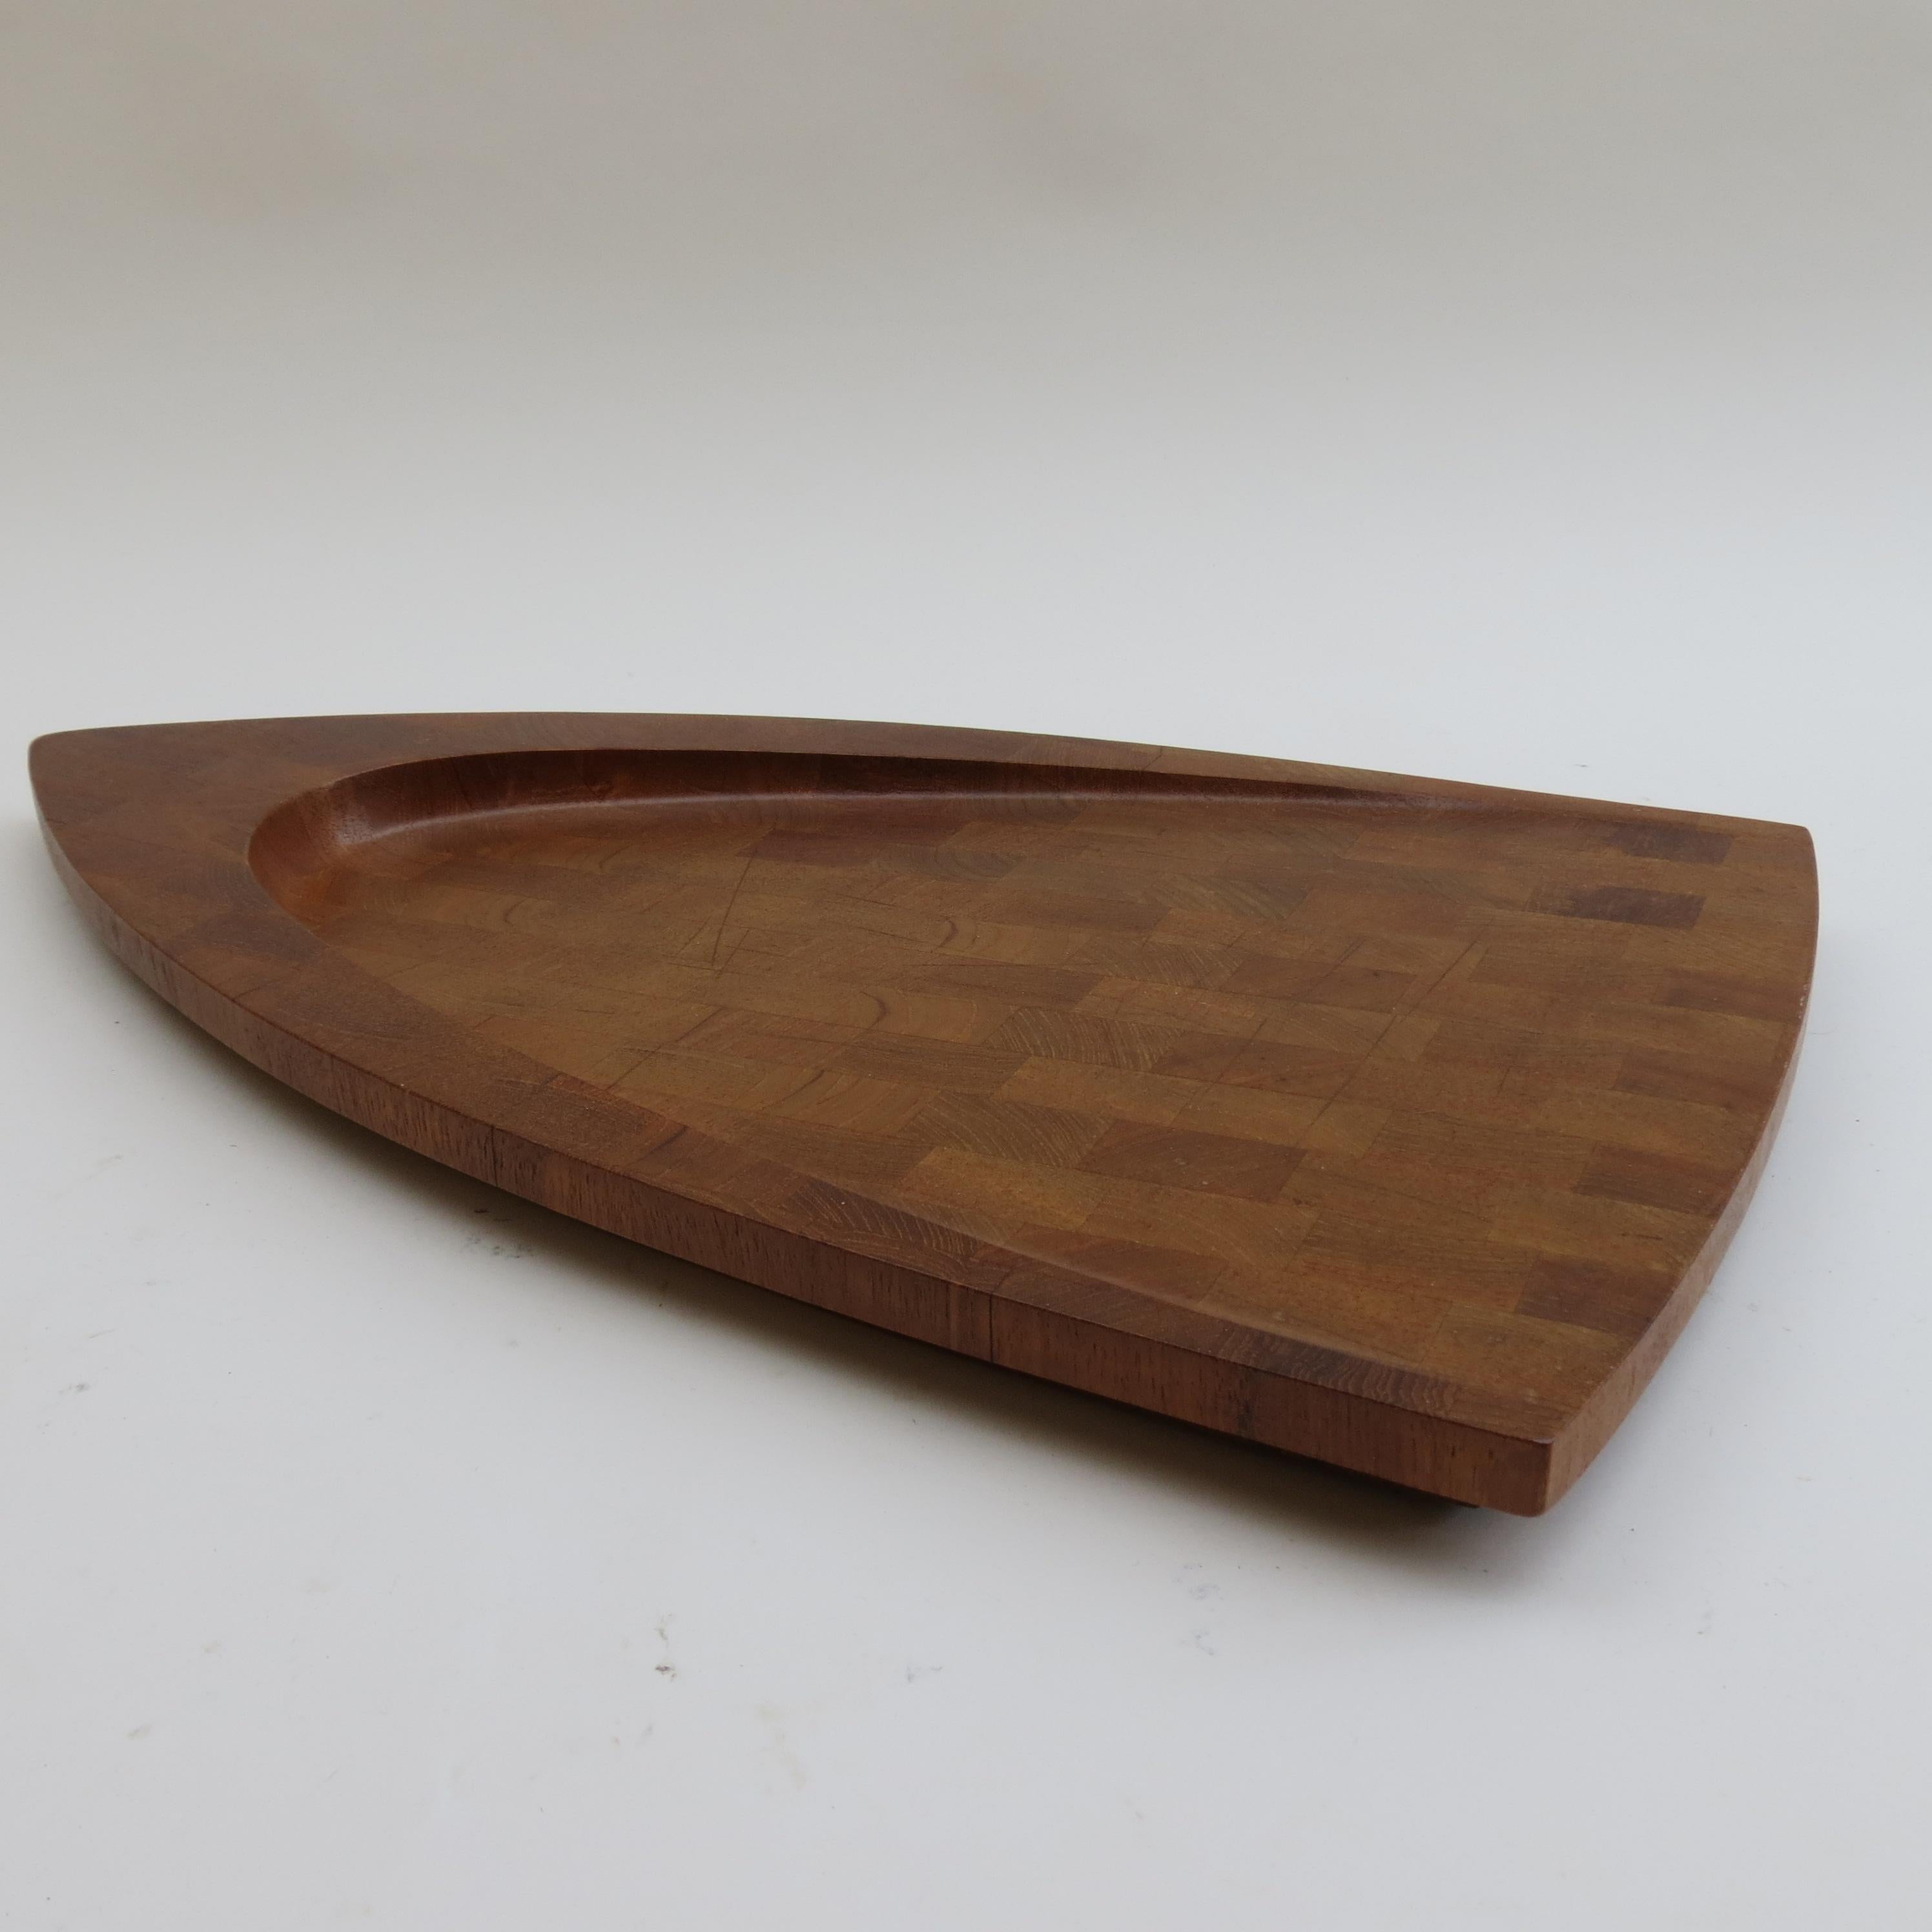 A large shaped serving tray or cutting board designed by Fleming Digsmed and produced by Digsmed, Denmark in 1964. Made from solid Teak blocked and shaped. Stamped to the underside with the Digsmed stamp, Denmark 1964.

ST1377